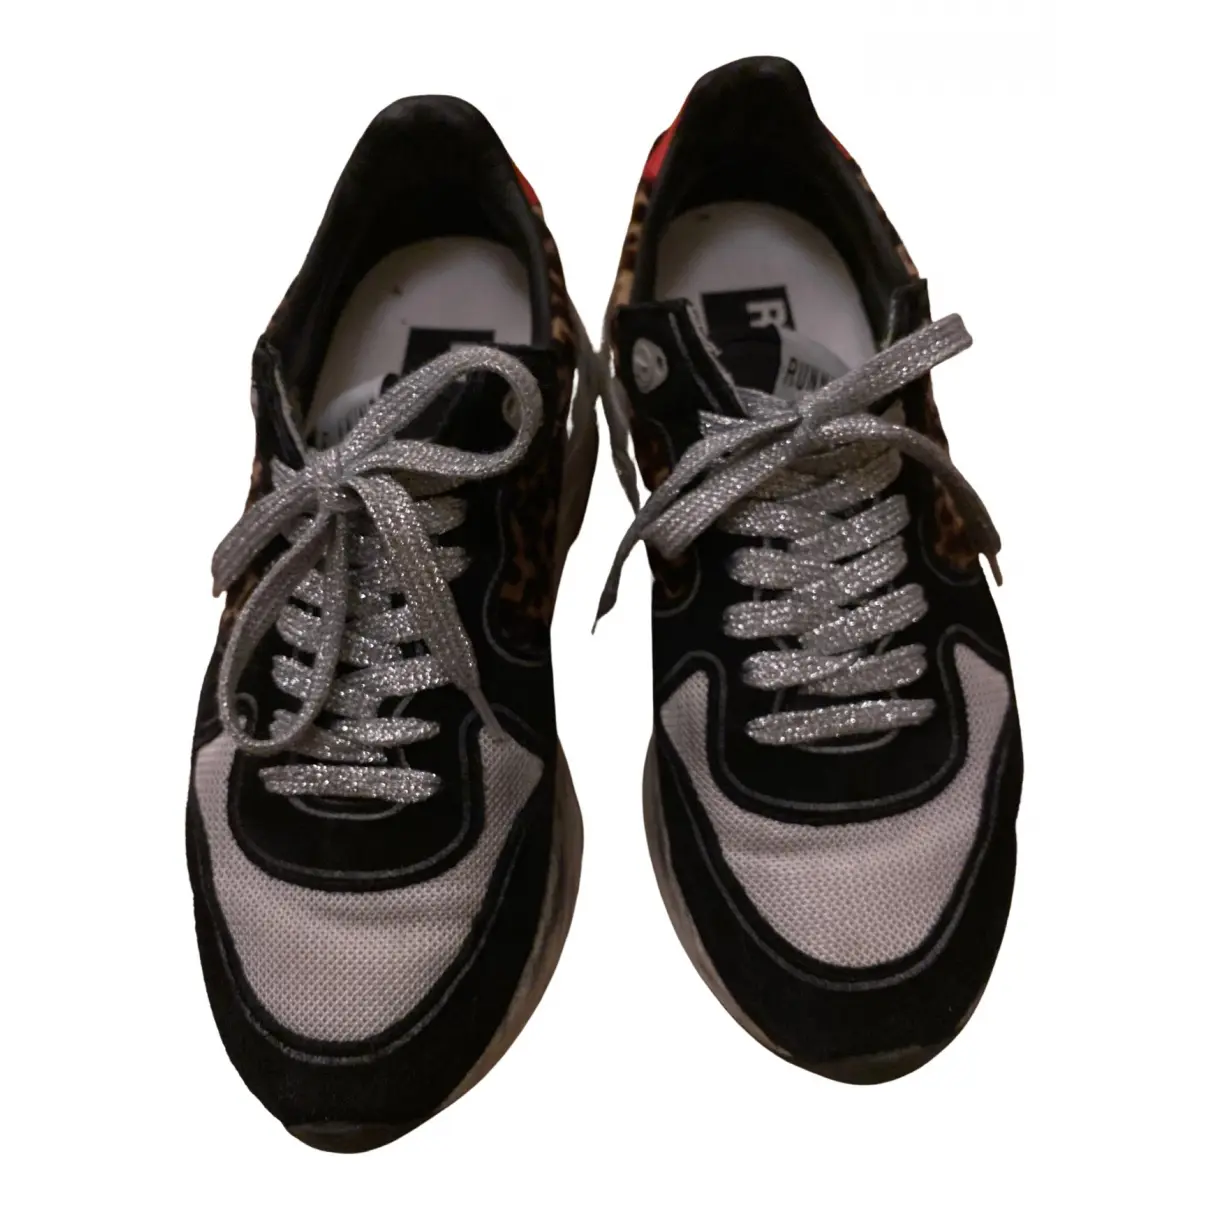 Running pony-style calfskin trainers Golden Goose